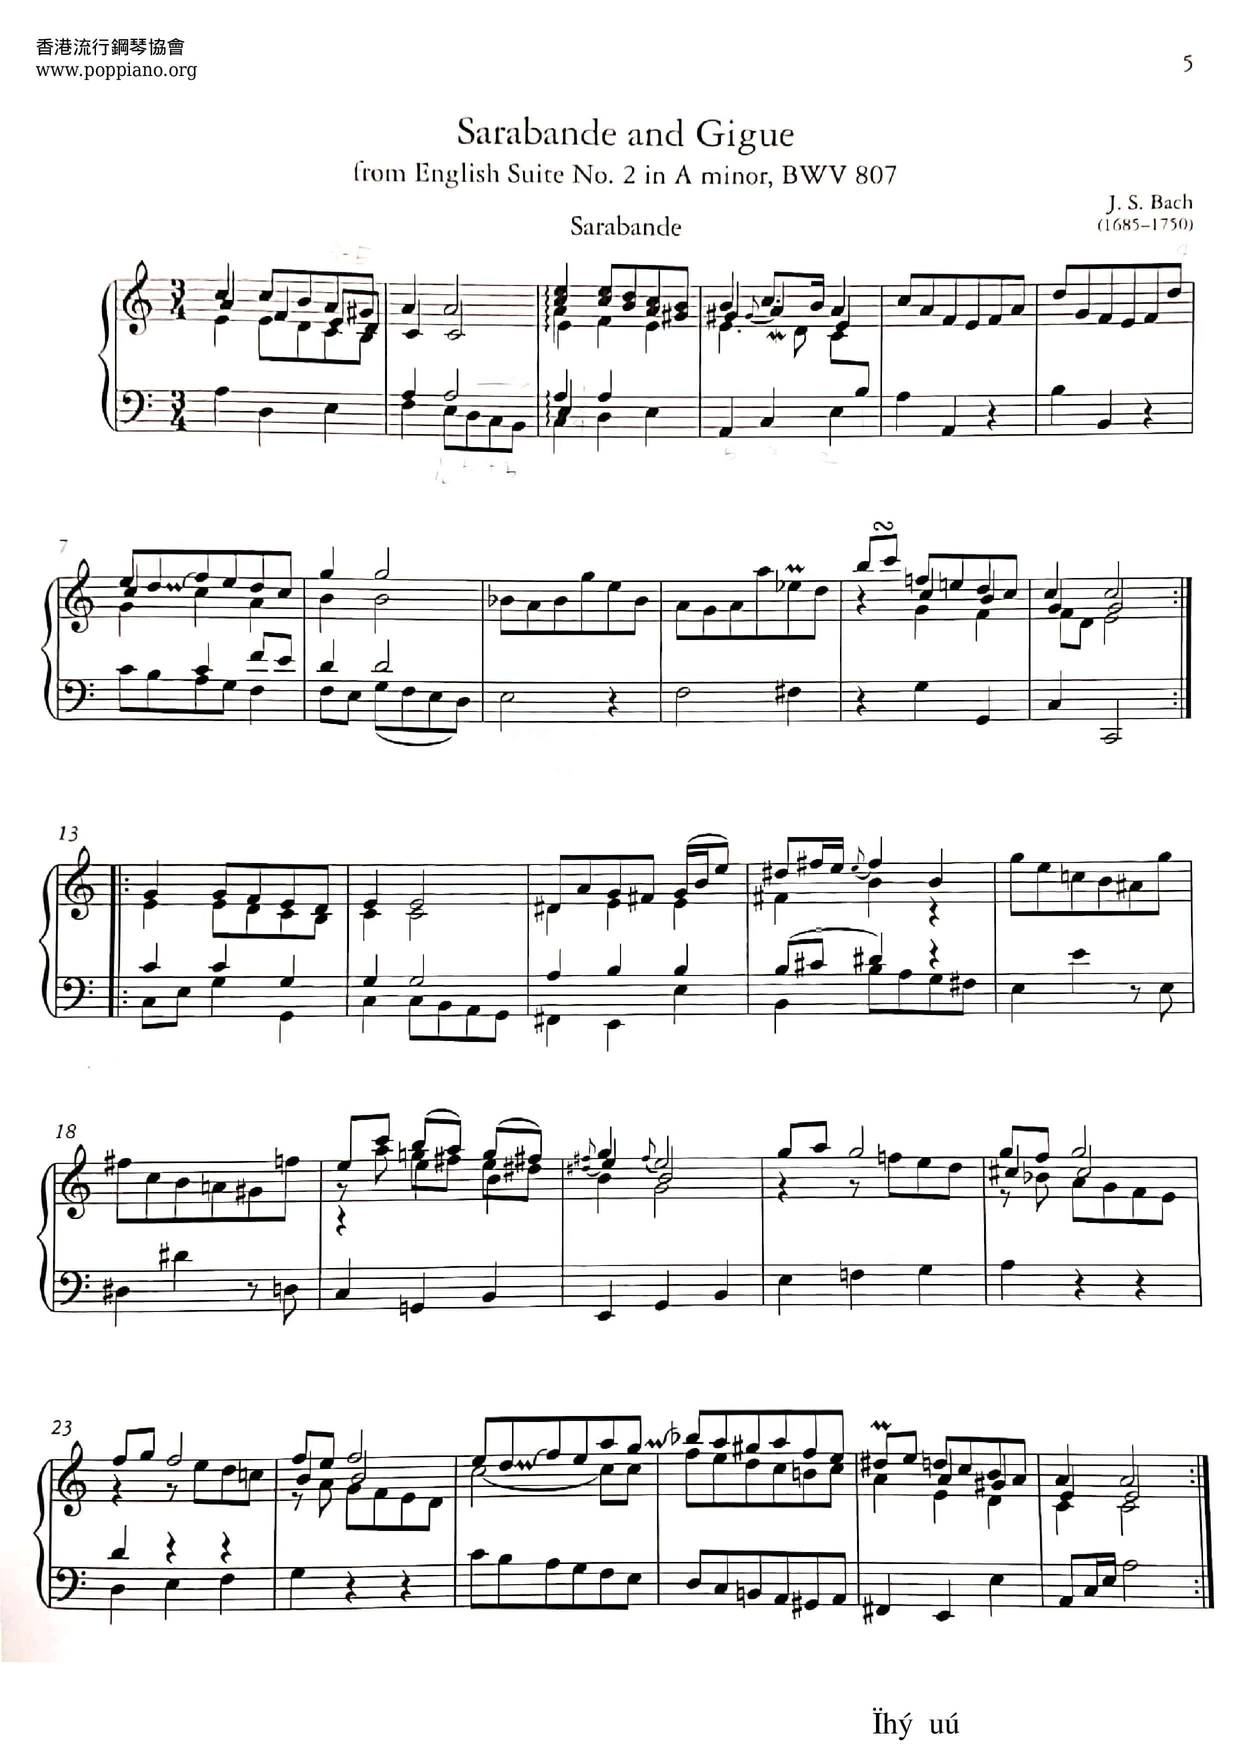 English Suite No.2 in A minor, BWV 807 Score